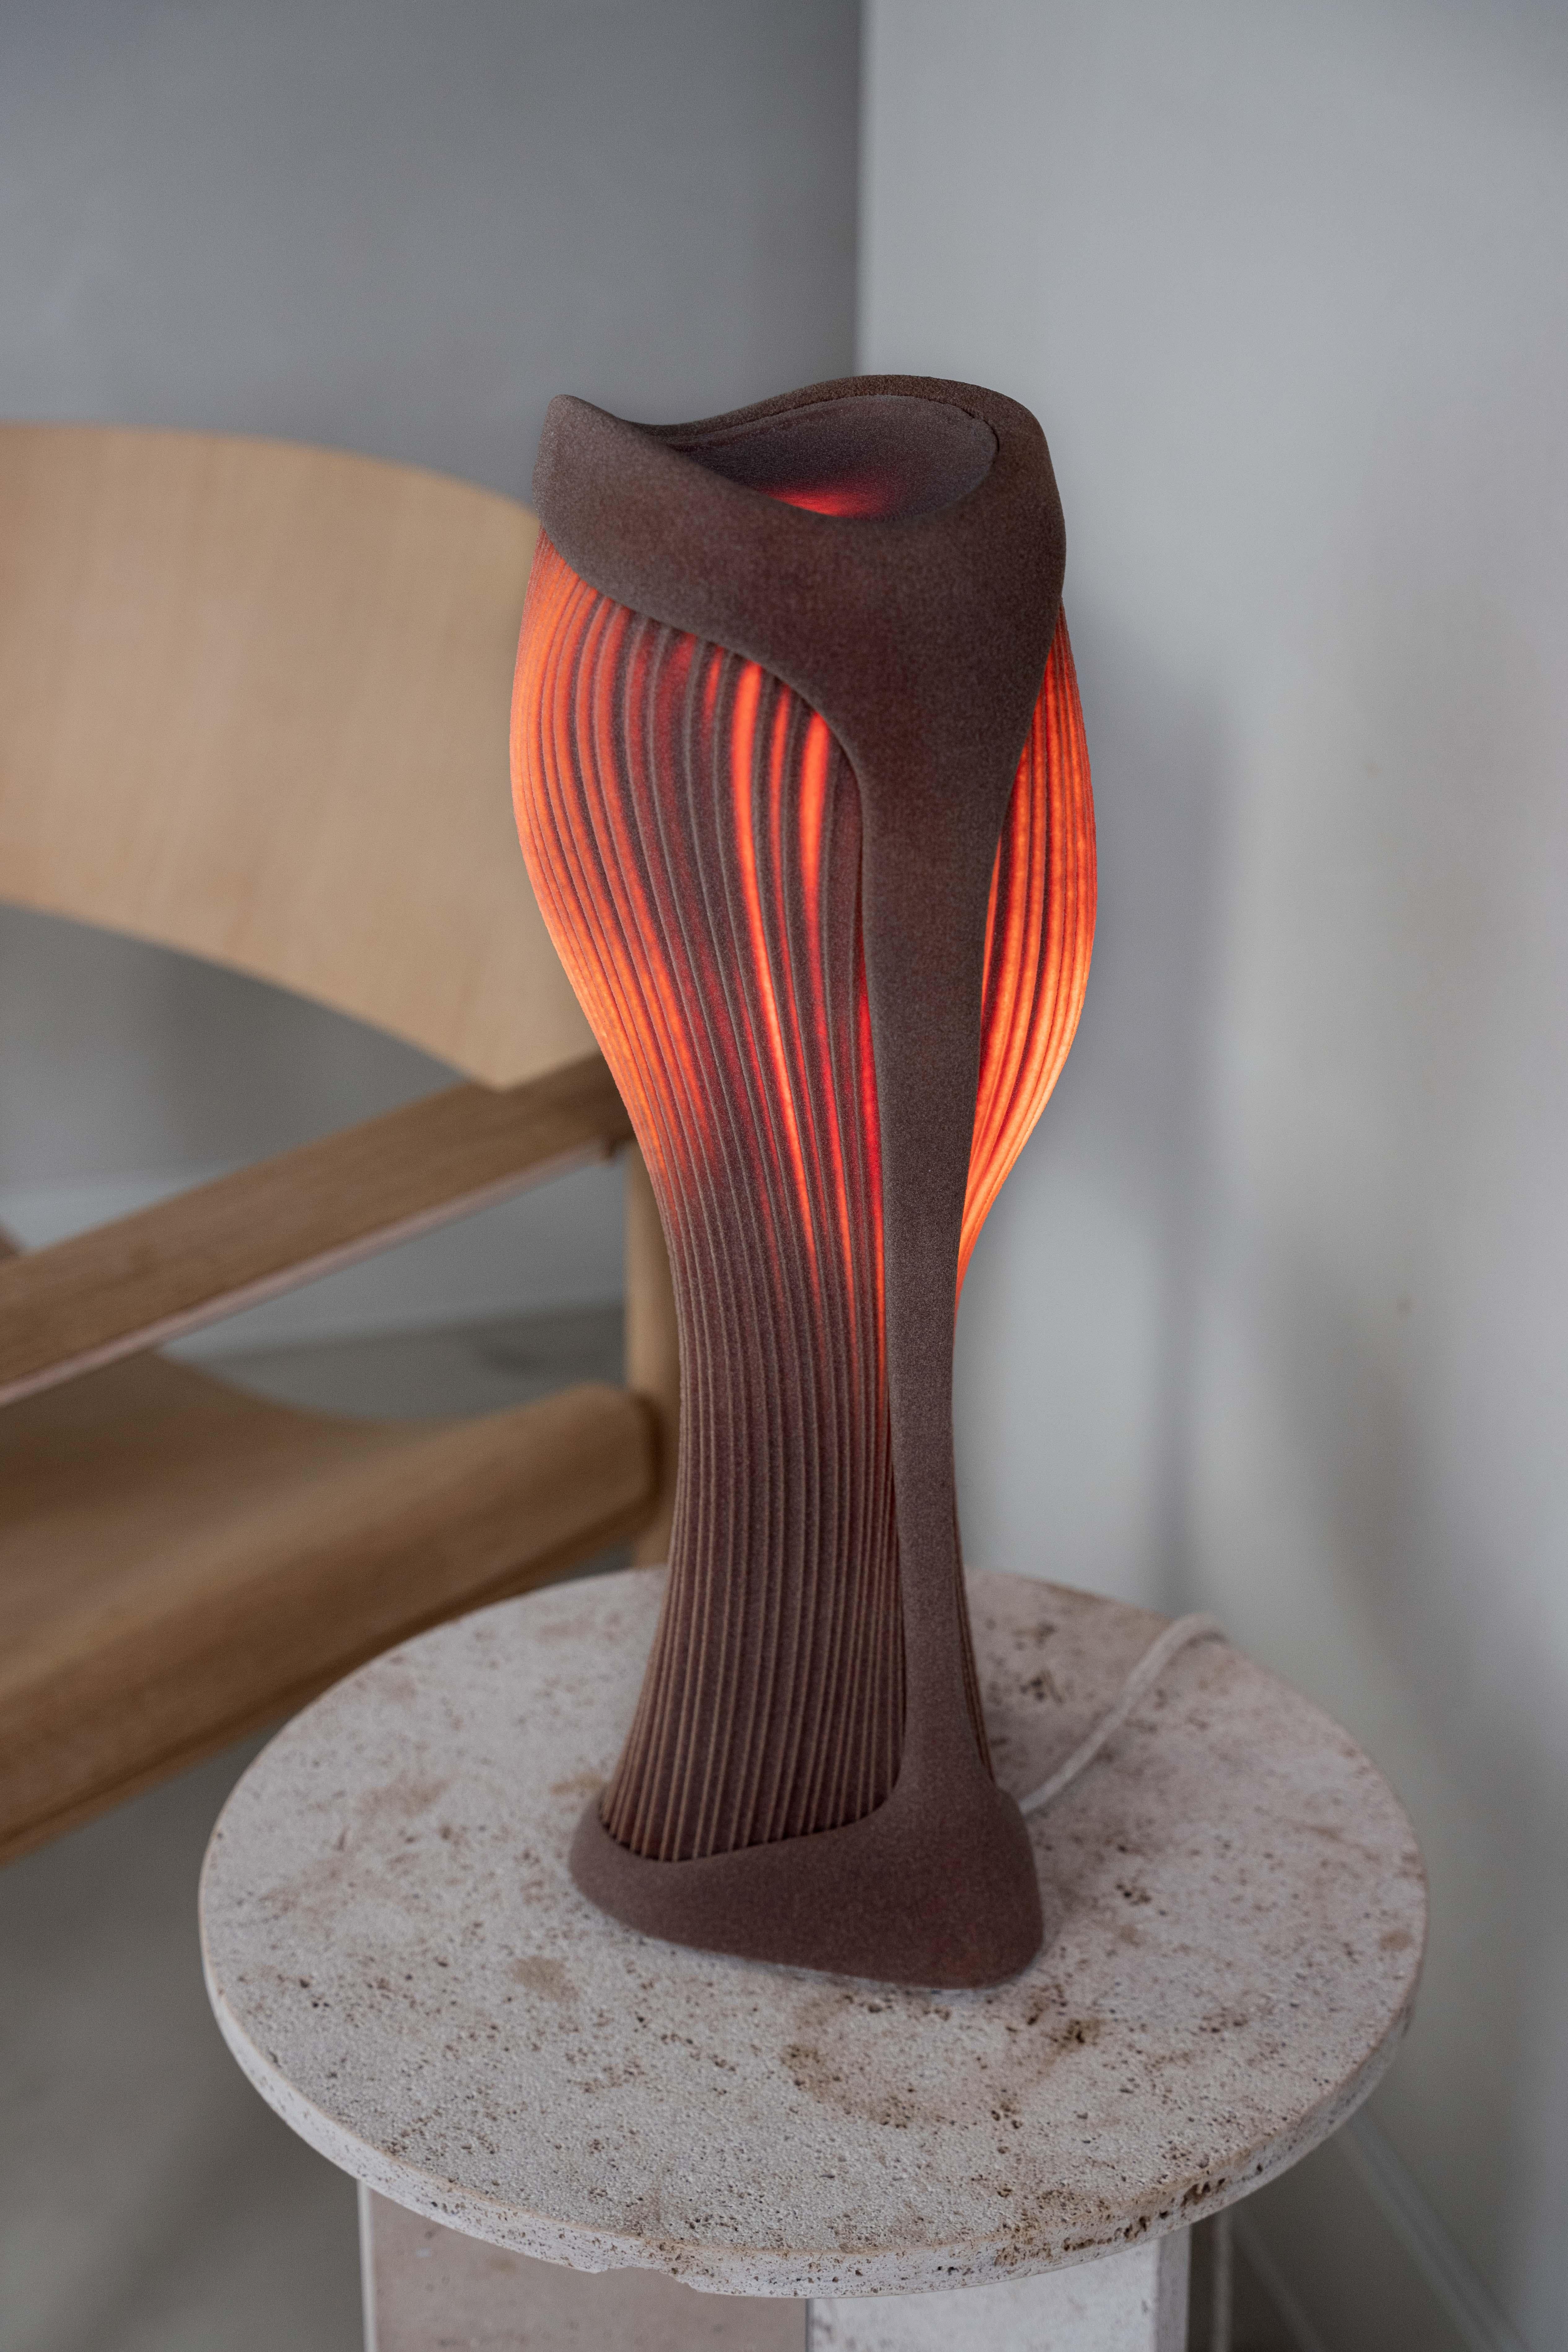 The Para table lamp, part of the Dune Collection, was inspired by the natural beauty of the desert landscape, and has been meticulously crafted using advanced 3D printing technology from quartz sand.

The lamp emanates a warm, ambient glow that